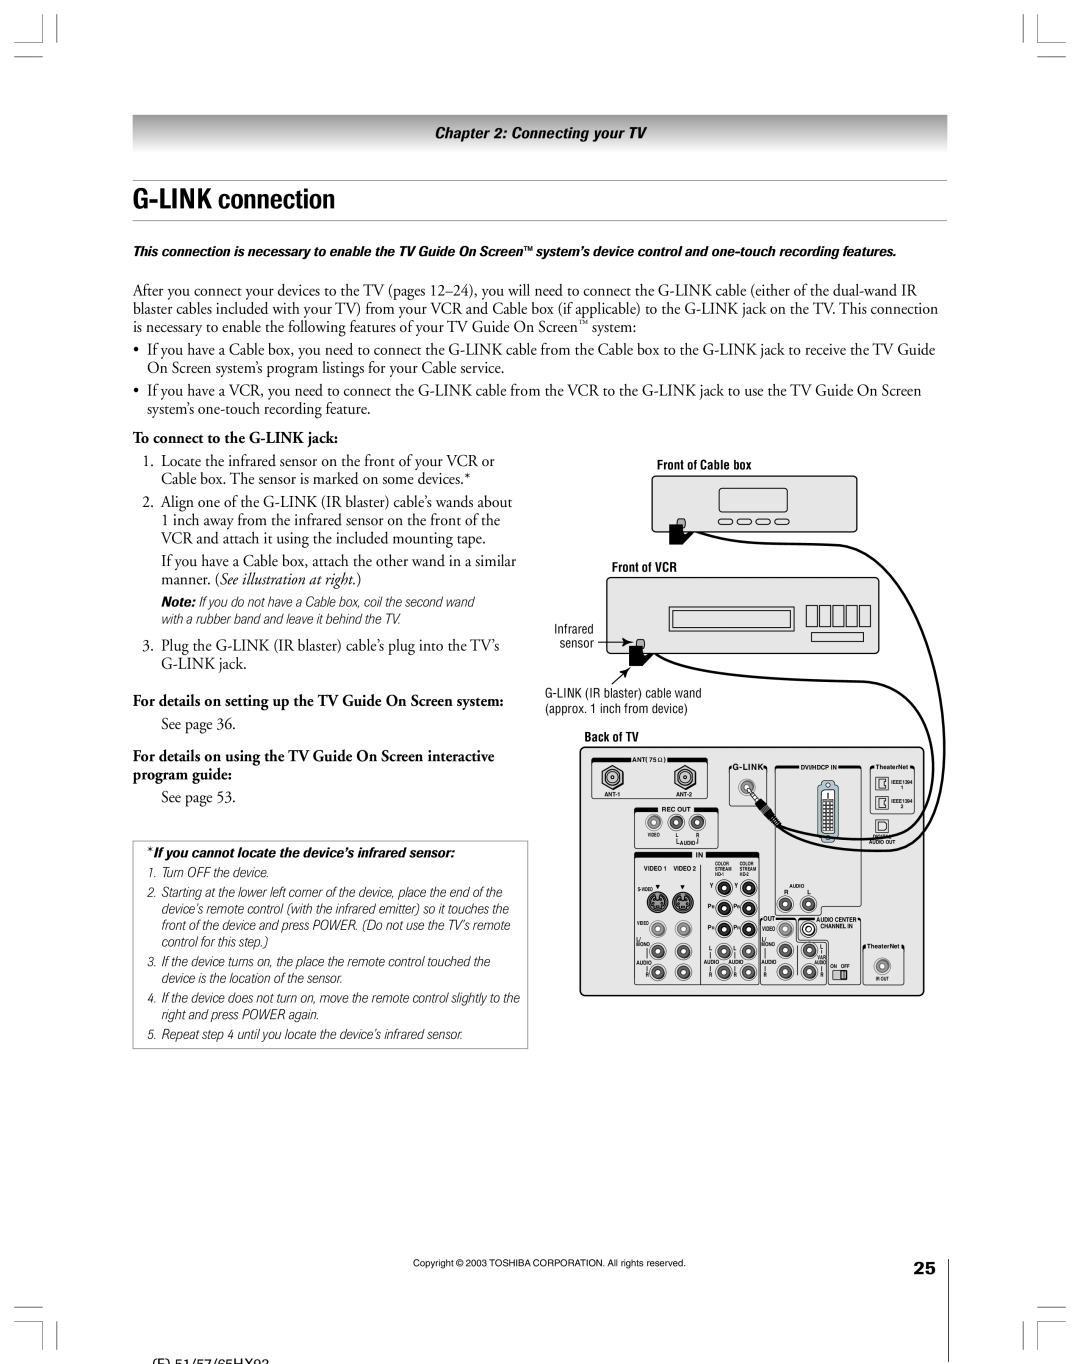 Toshiba 51HX93 owner manual G-LINK connection, To connect to the G-LINK jack 